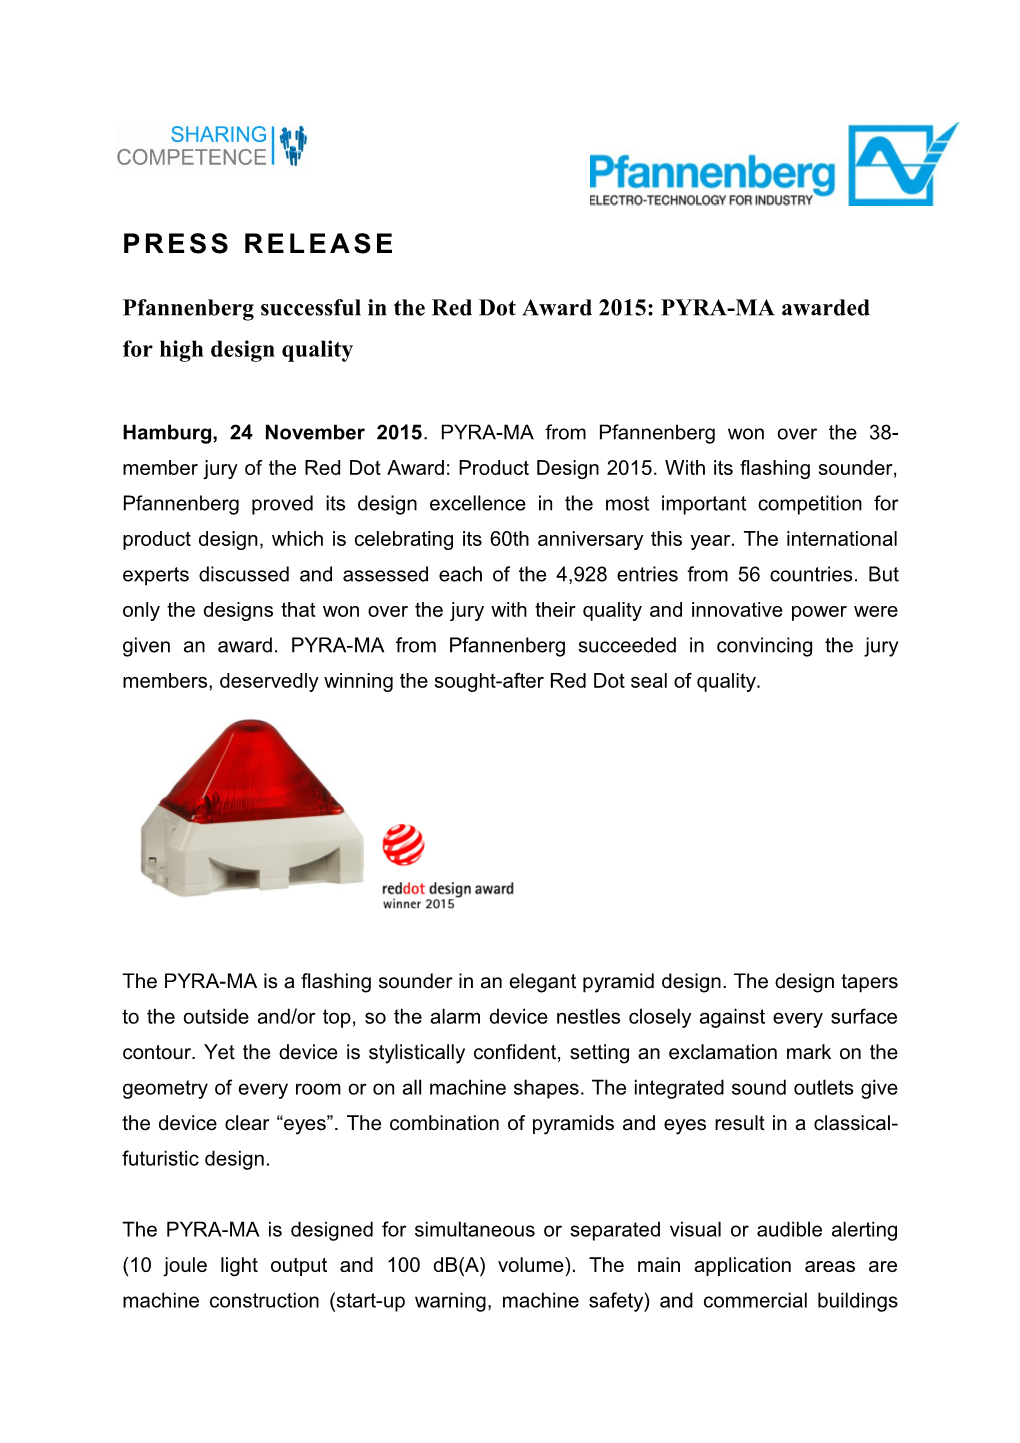 Pfannenberg Successful in the Red Dot Award 2015: PYRA-MA Awarded for High Design Quality